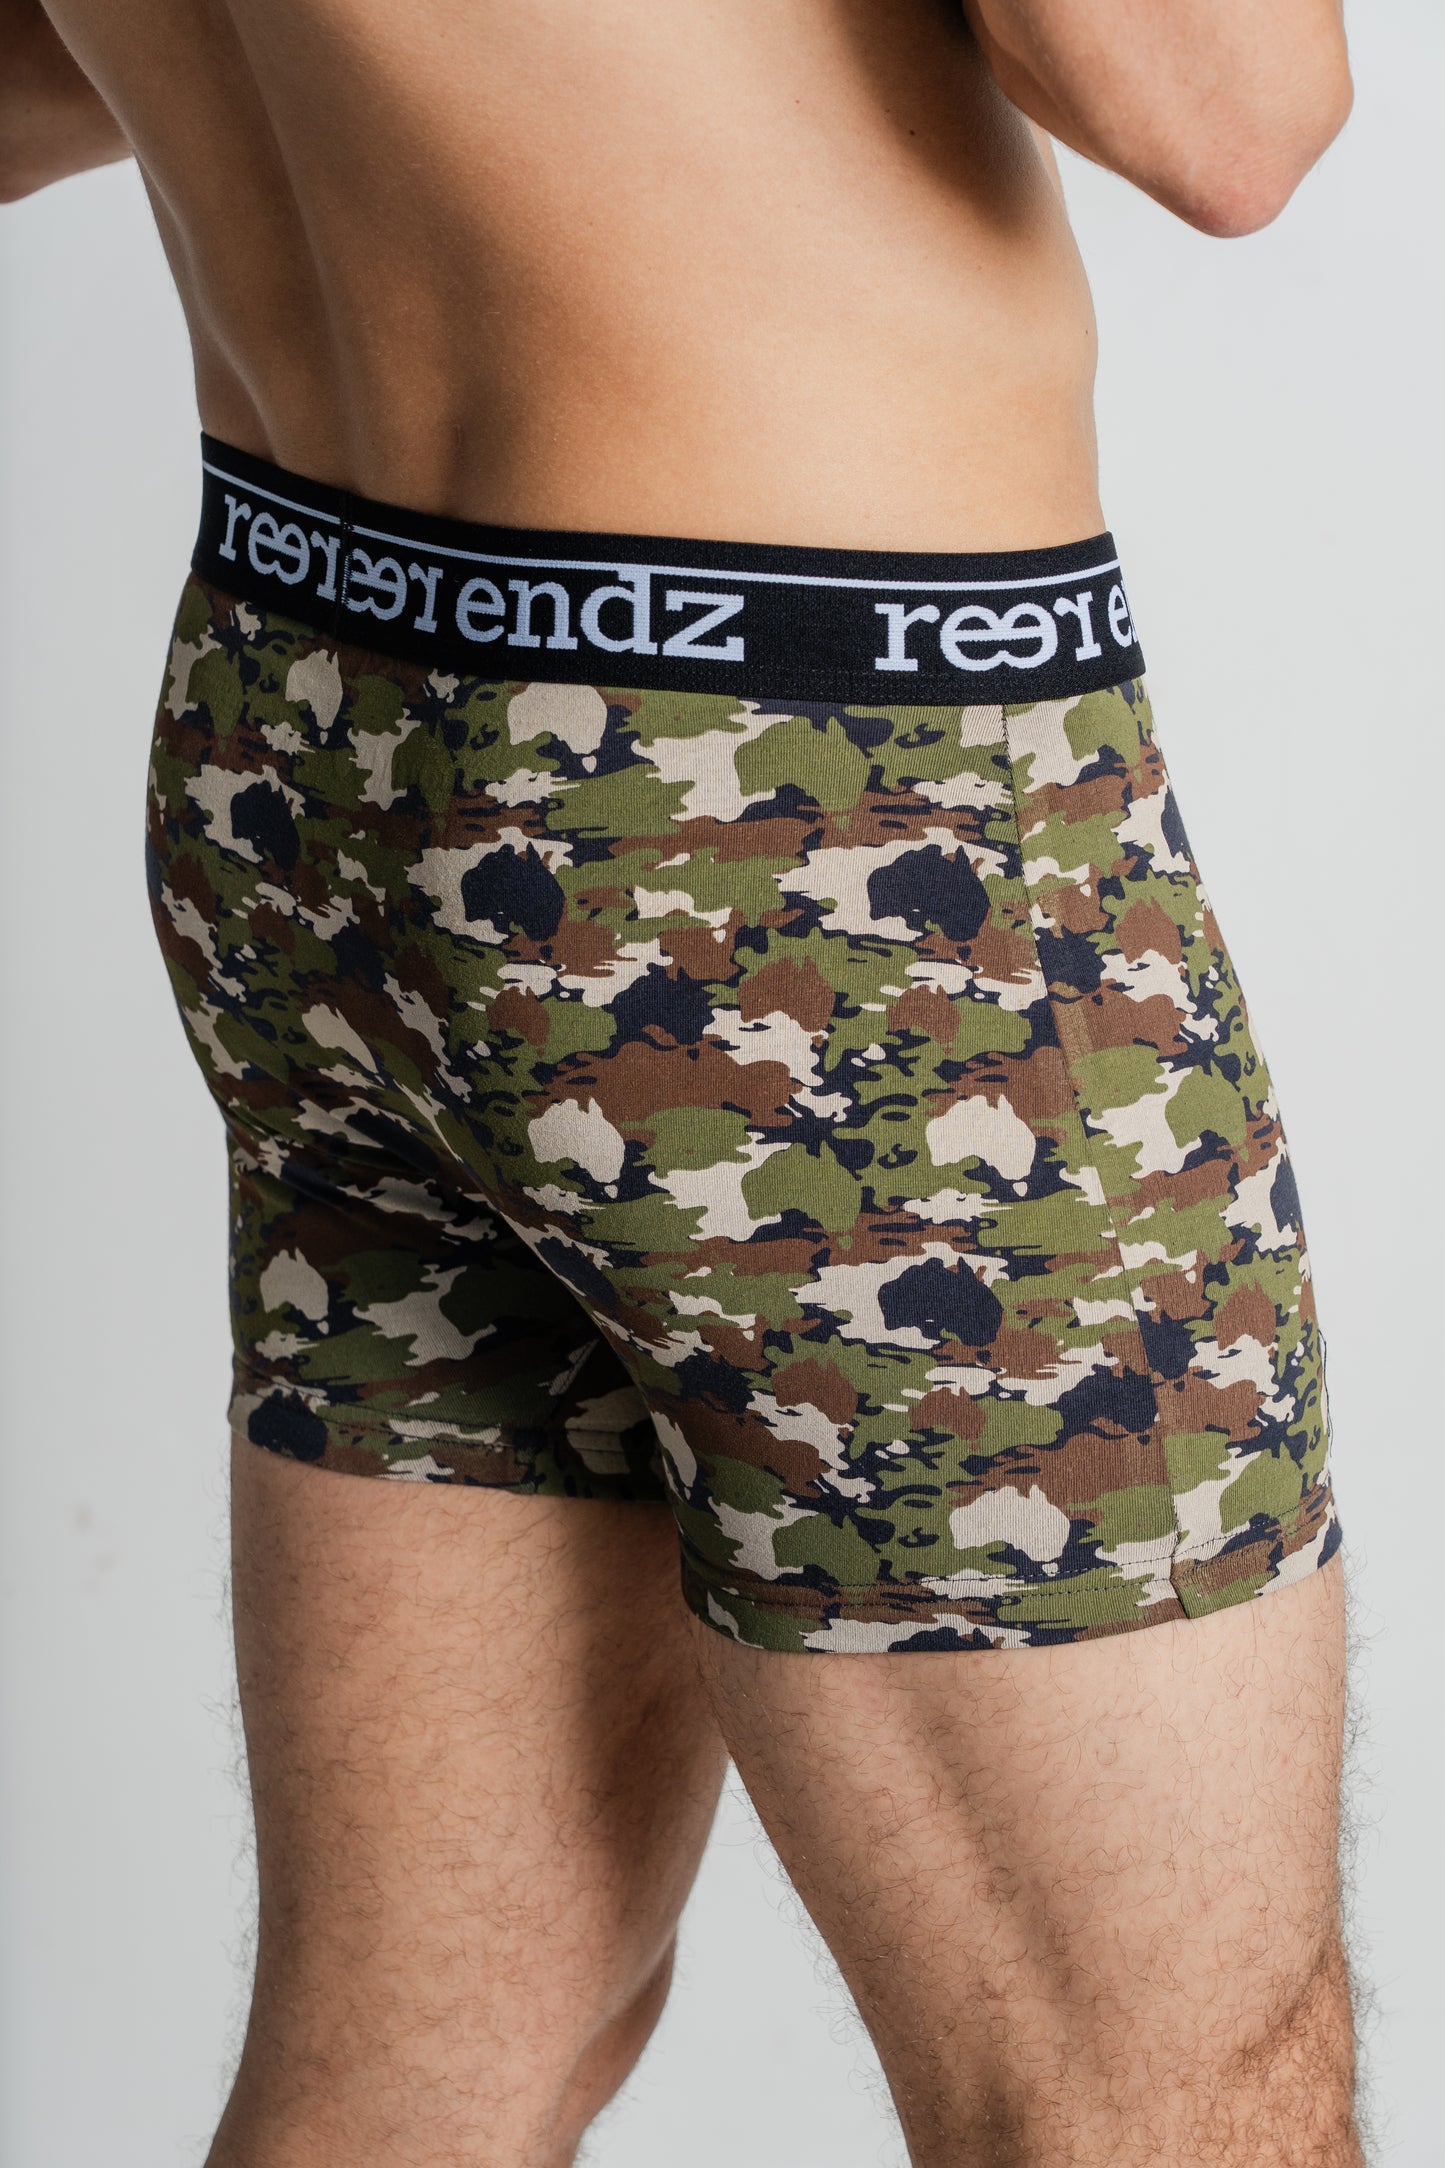 Discover the stylish Incognito Print in Reer Endz men's trunks, as showcased by a male model. Experience unbeatable comfort with Organic Cotton.